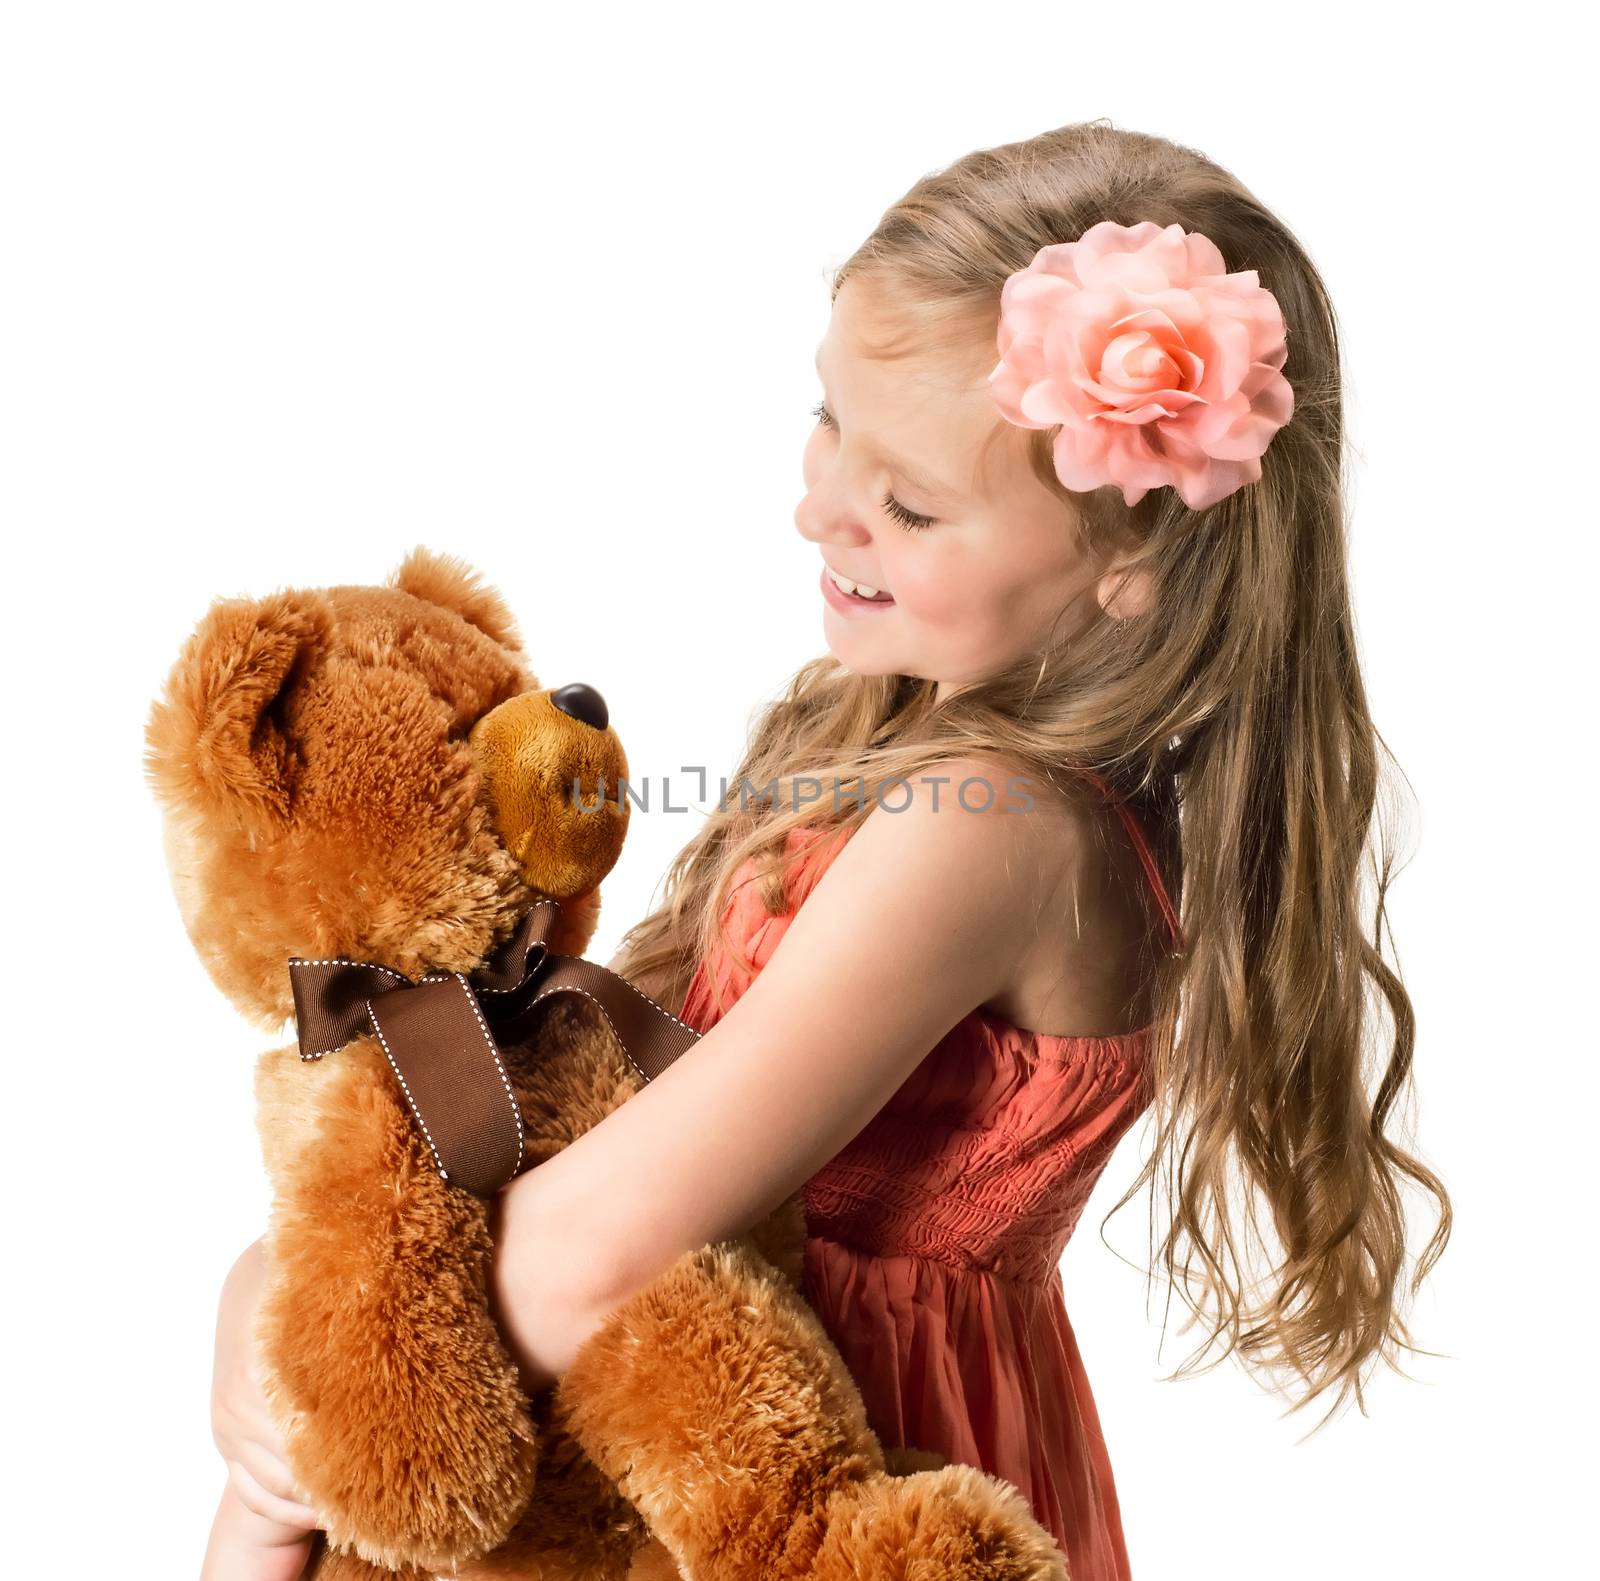 Little girl with teddy bear isolated on white background